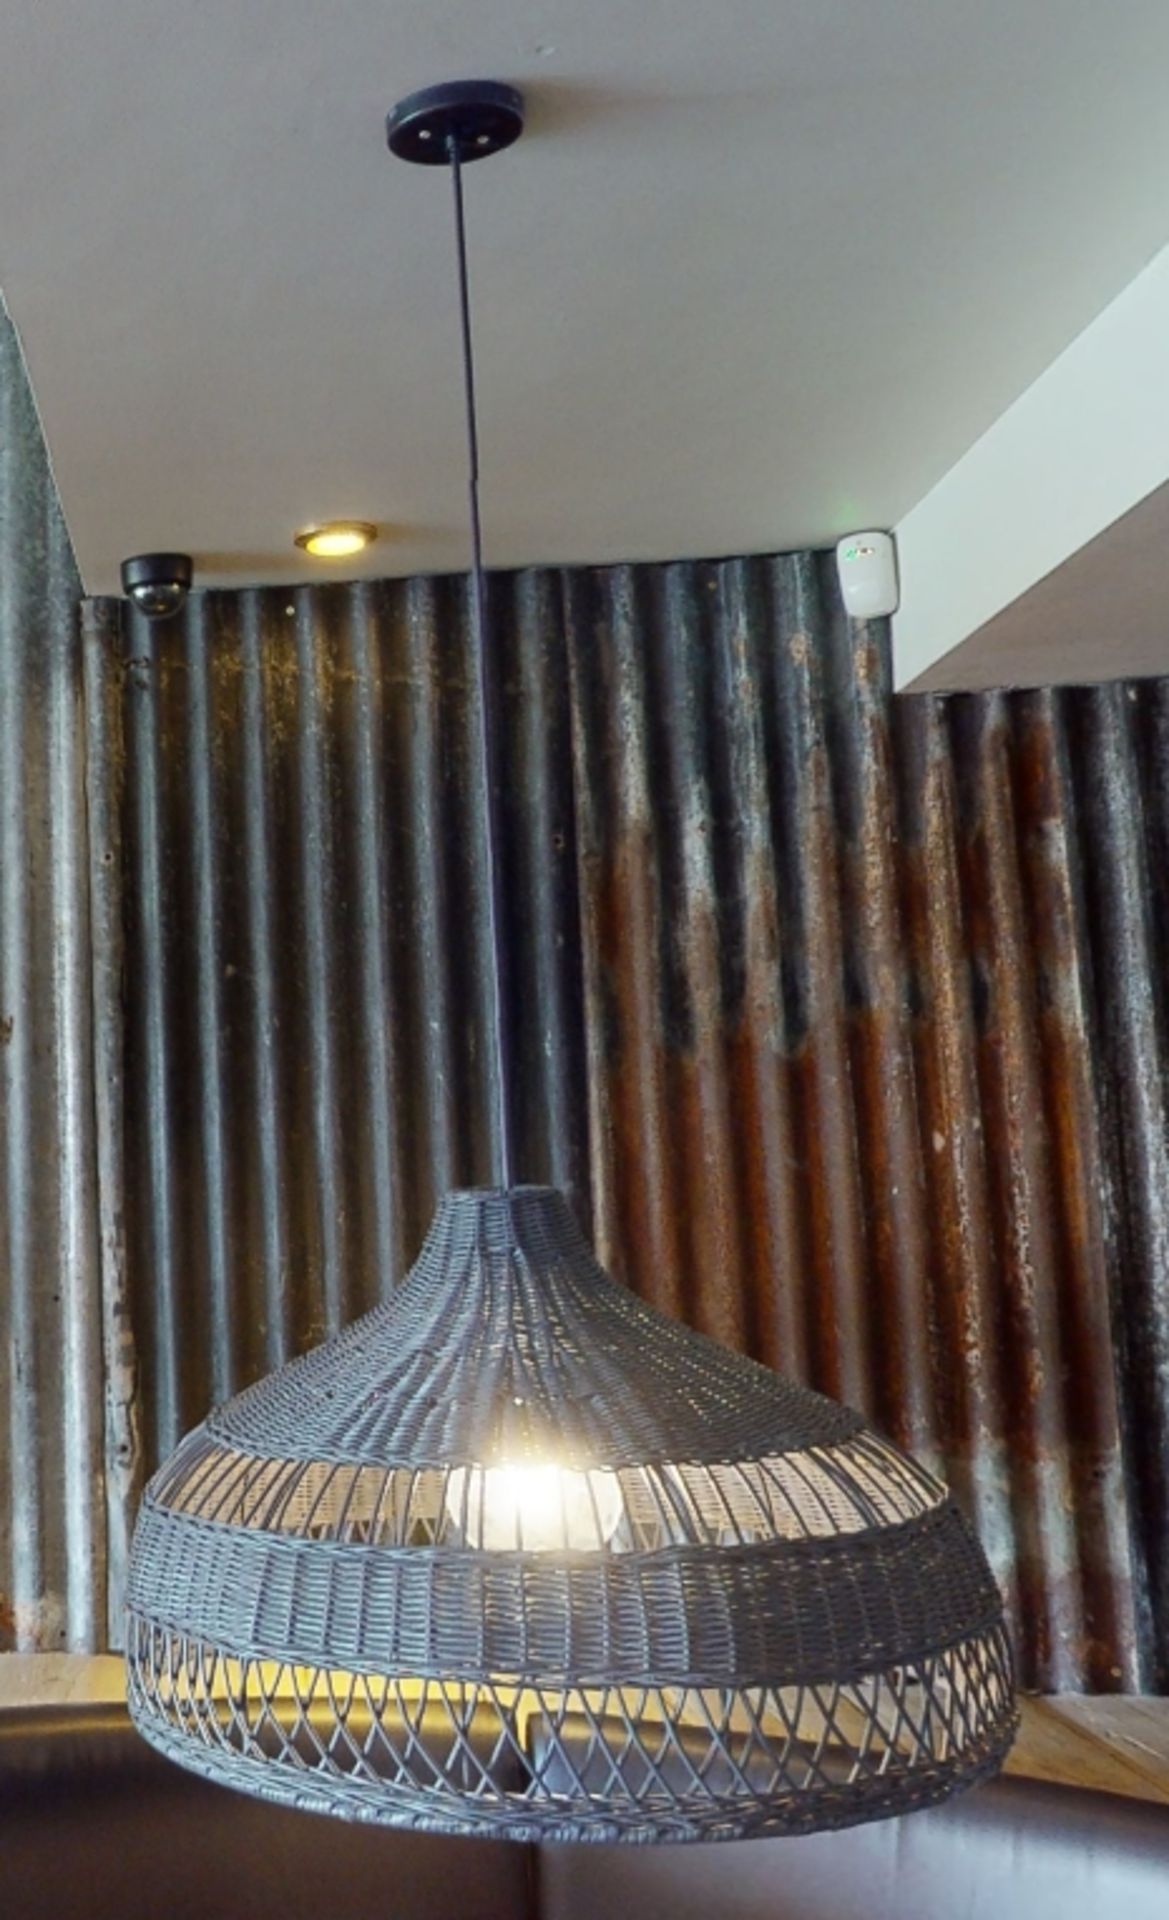 3 x Wicker Suspended Light Fittings in Charcoal Grey